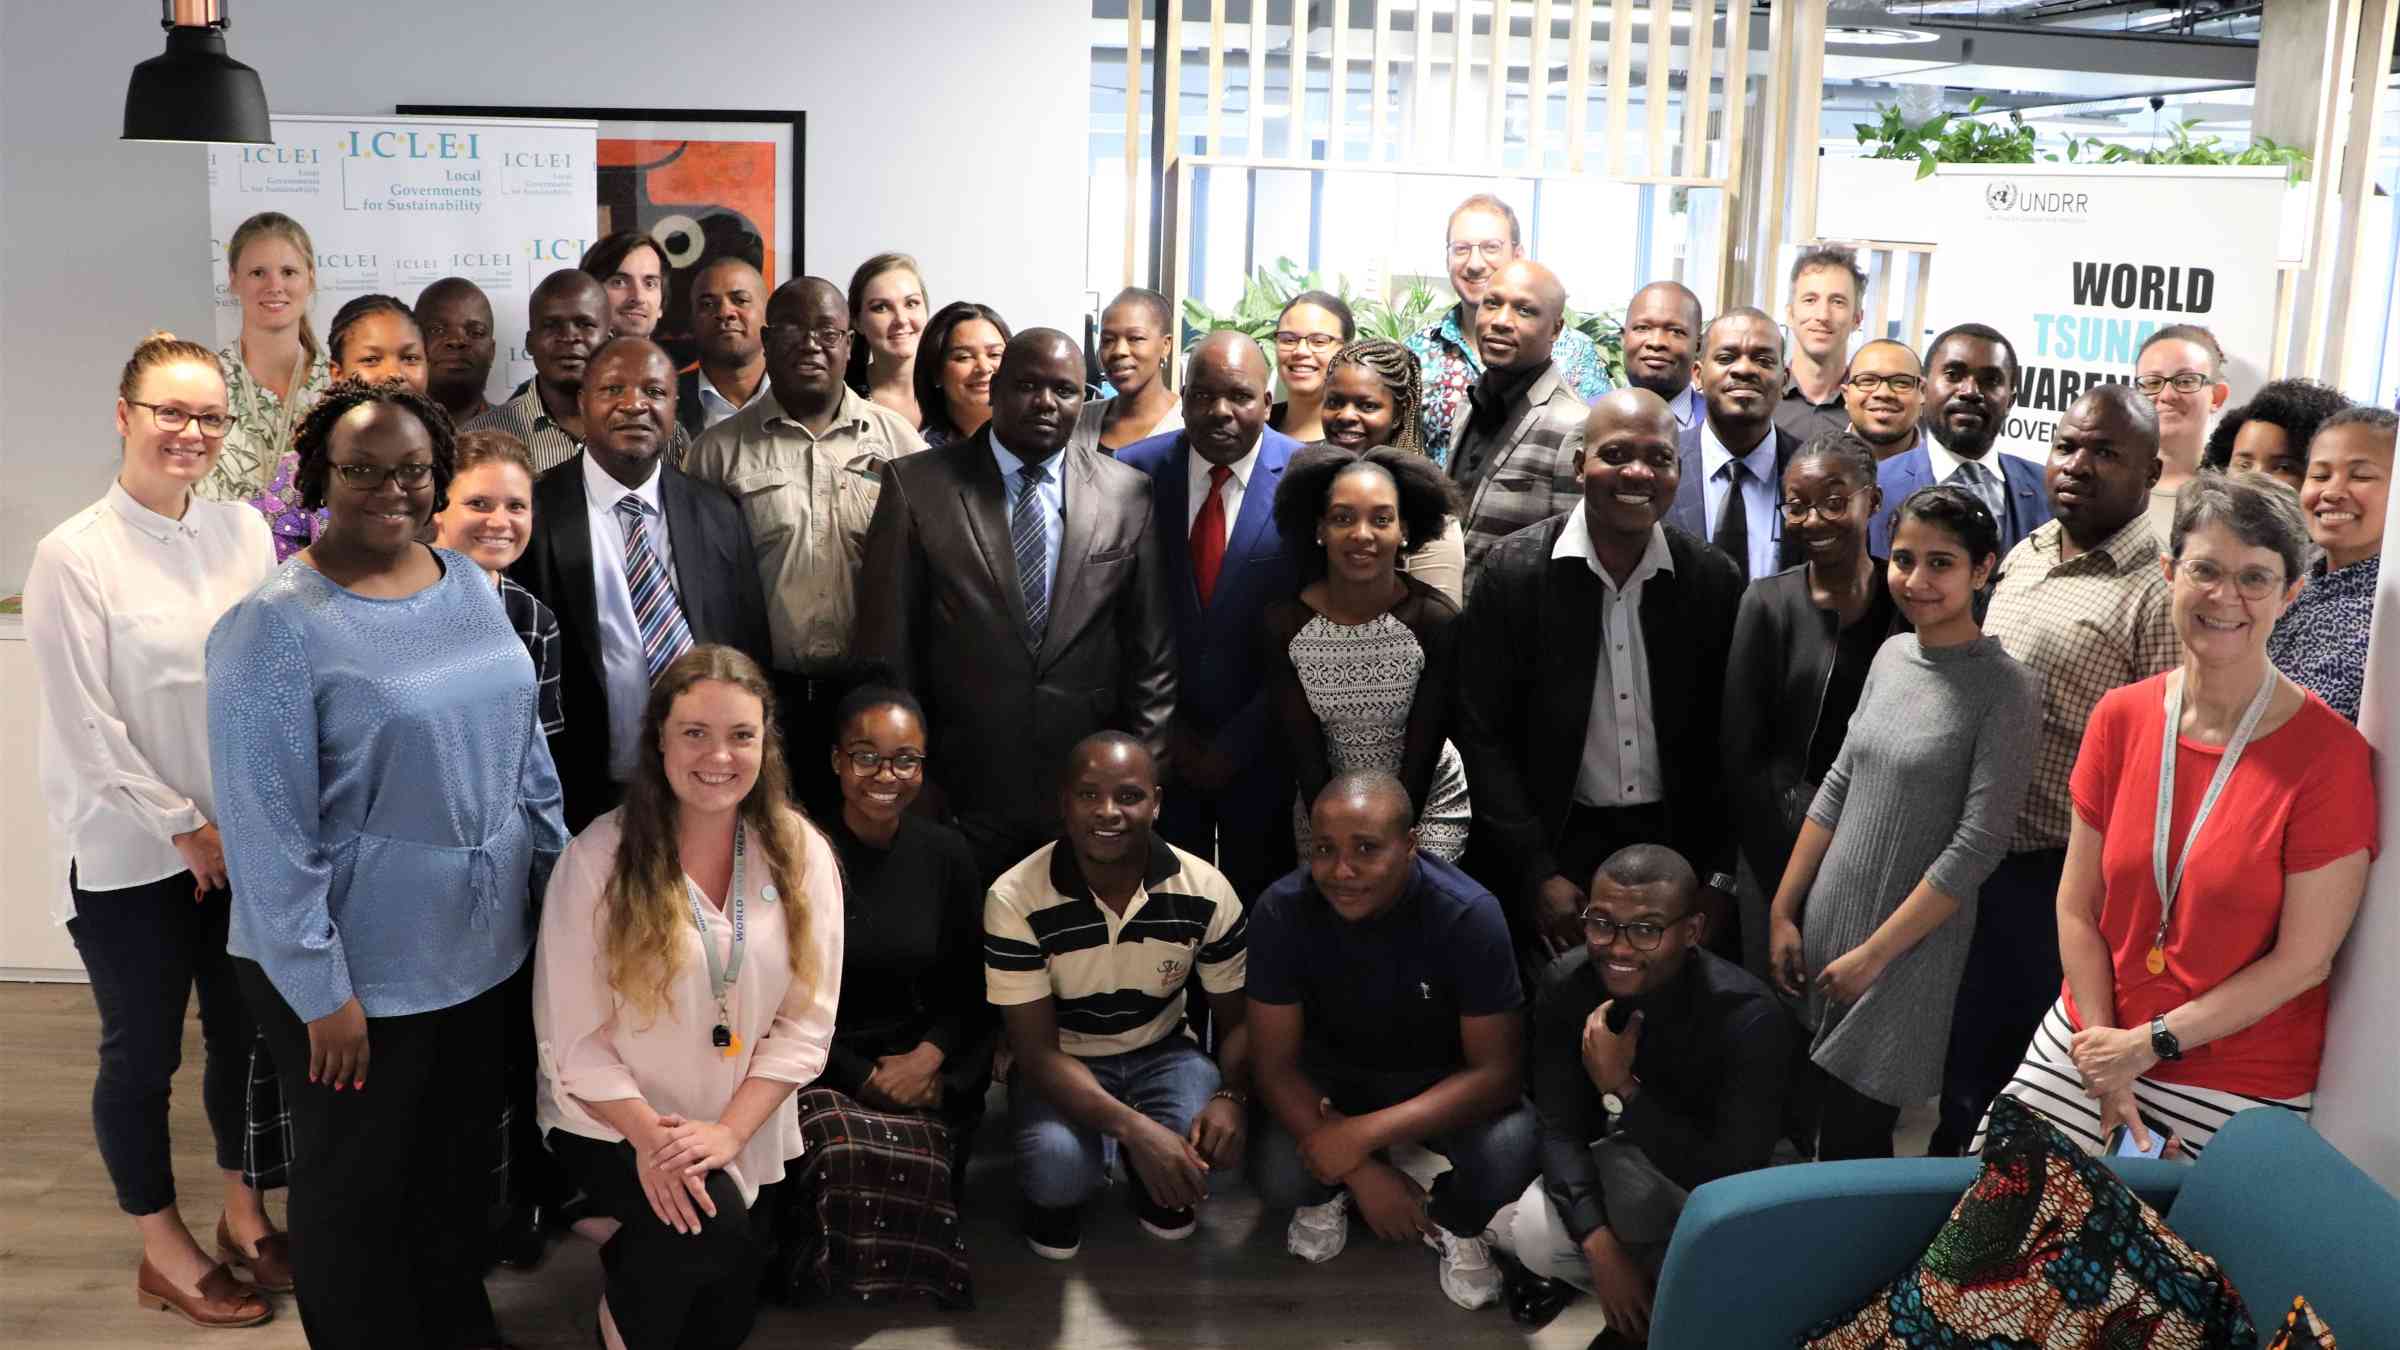 Participants at a workshop organised by UNDRR and ICLEI for cyclone affected cities in Africa